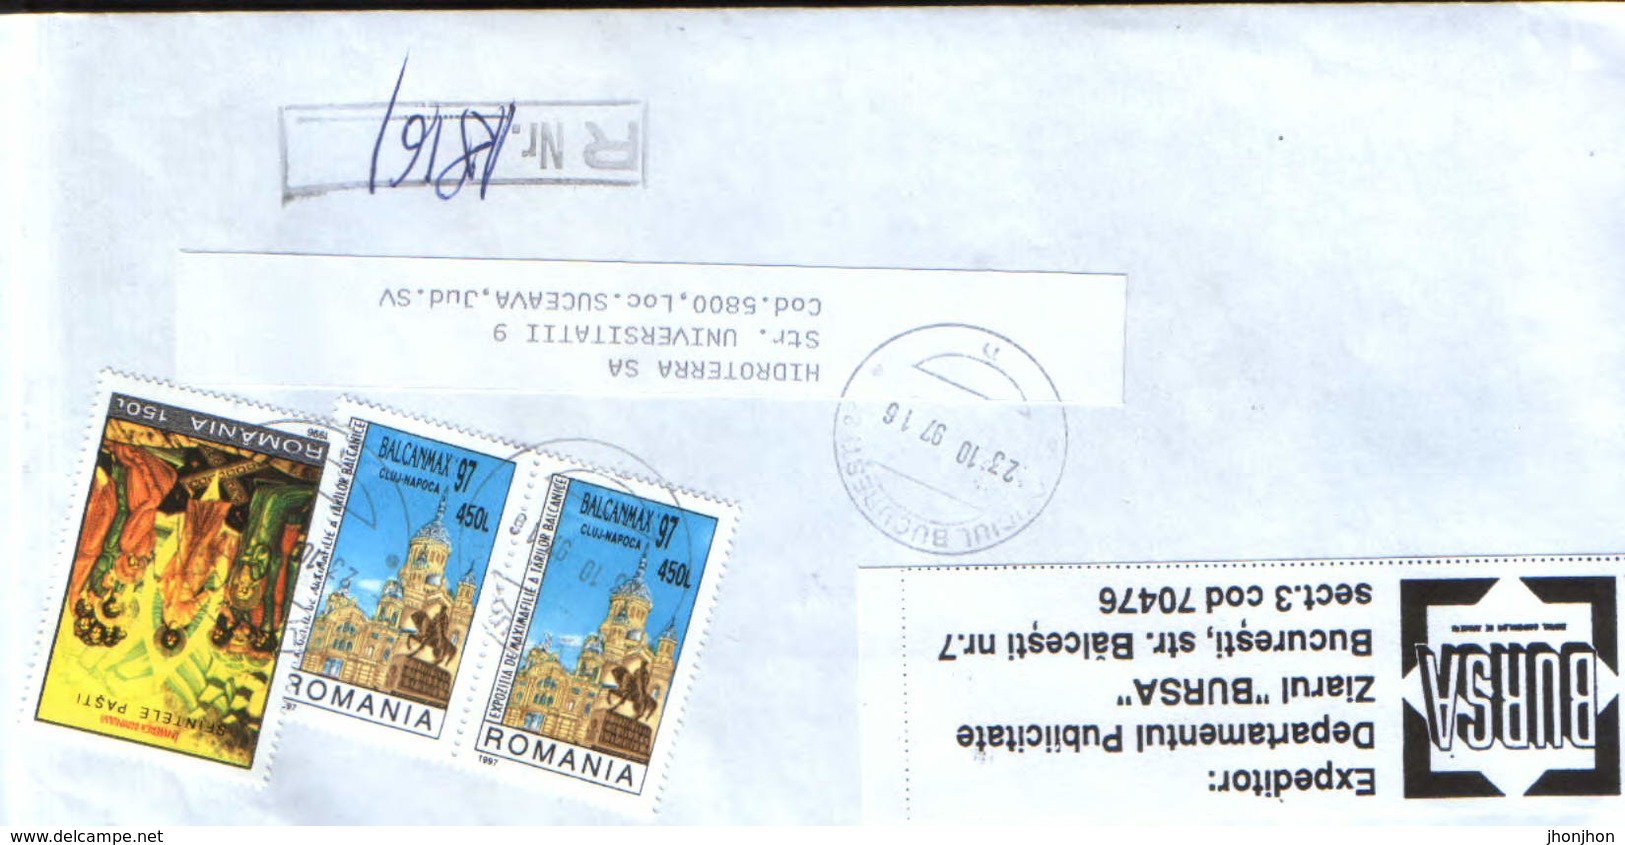 Romania - Registered  Letter Circulated In 1997  - 2/scans - Covers & Documents